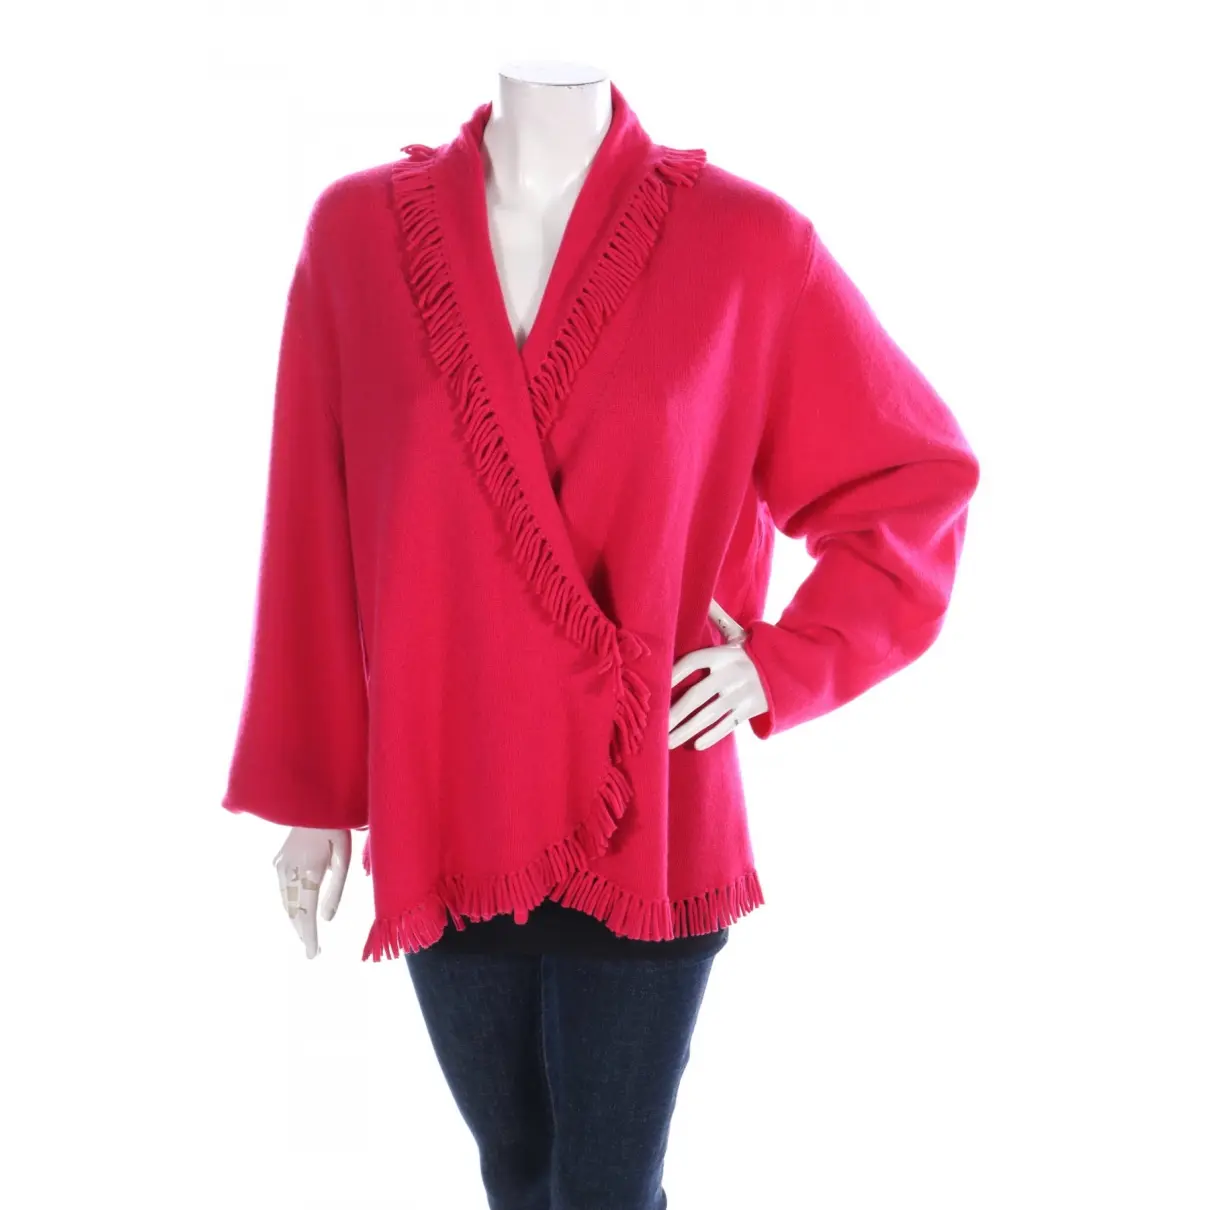 Buy Magaschoni Collection Cashmere cardigan online